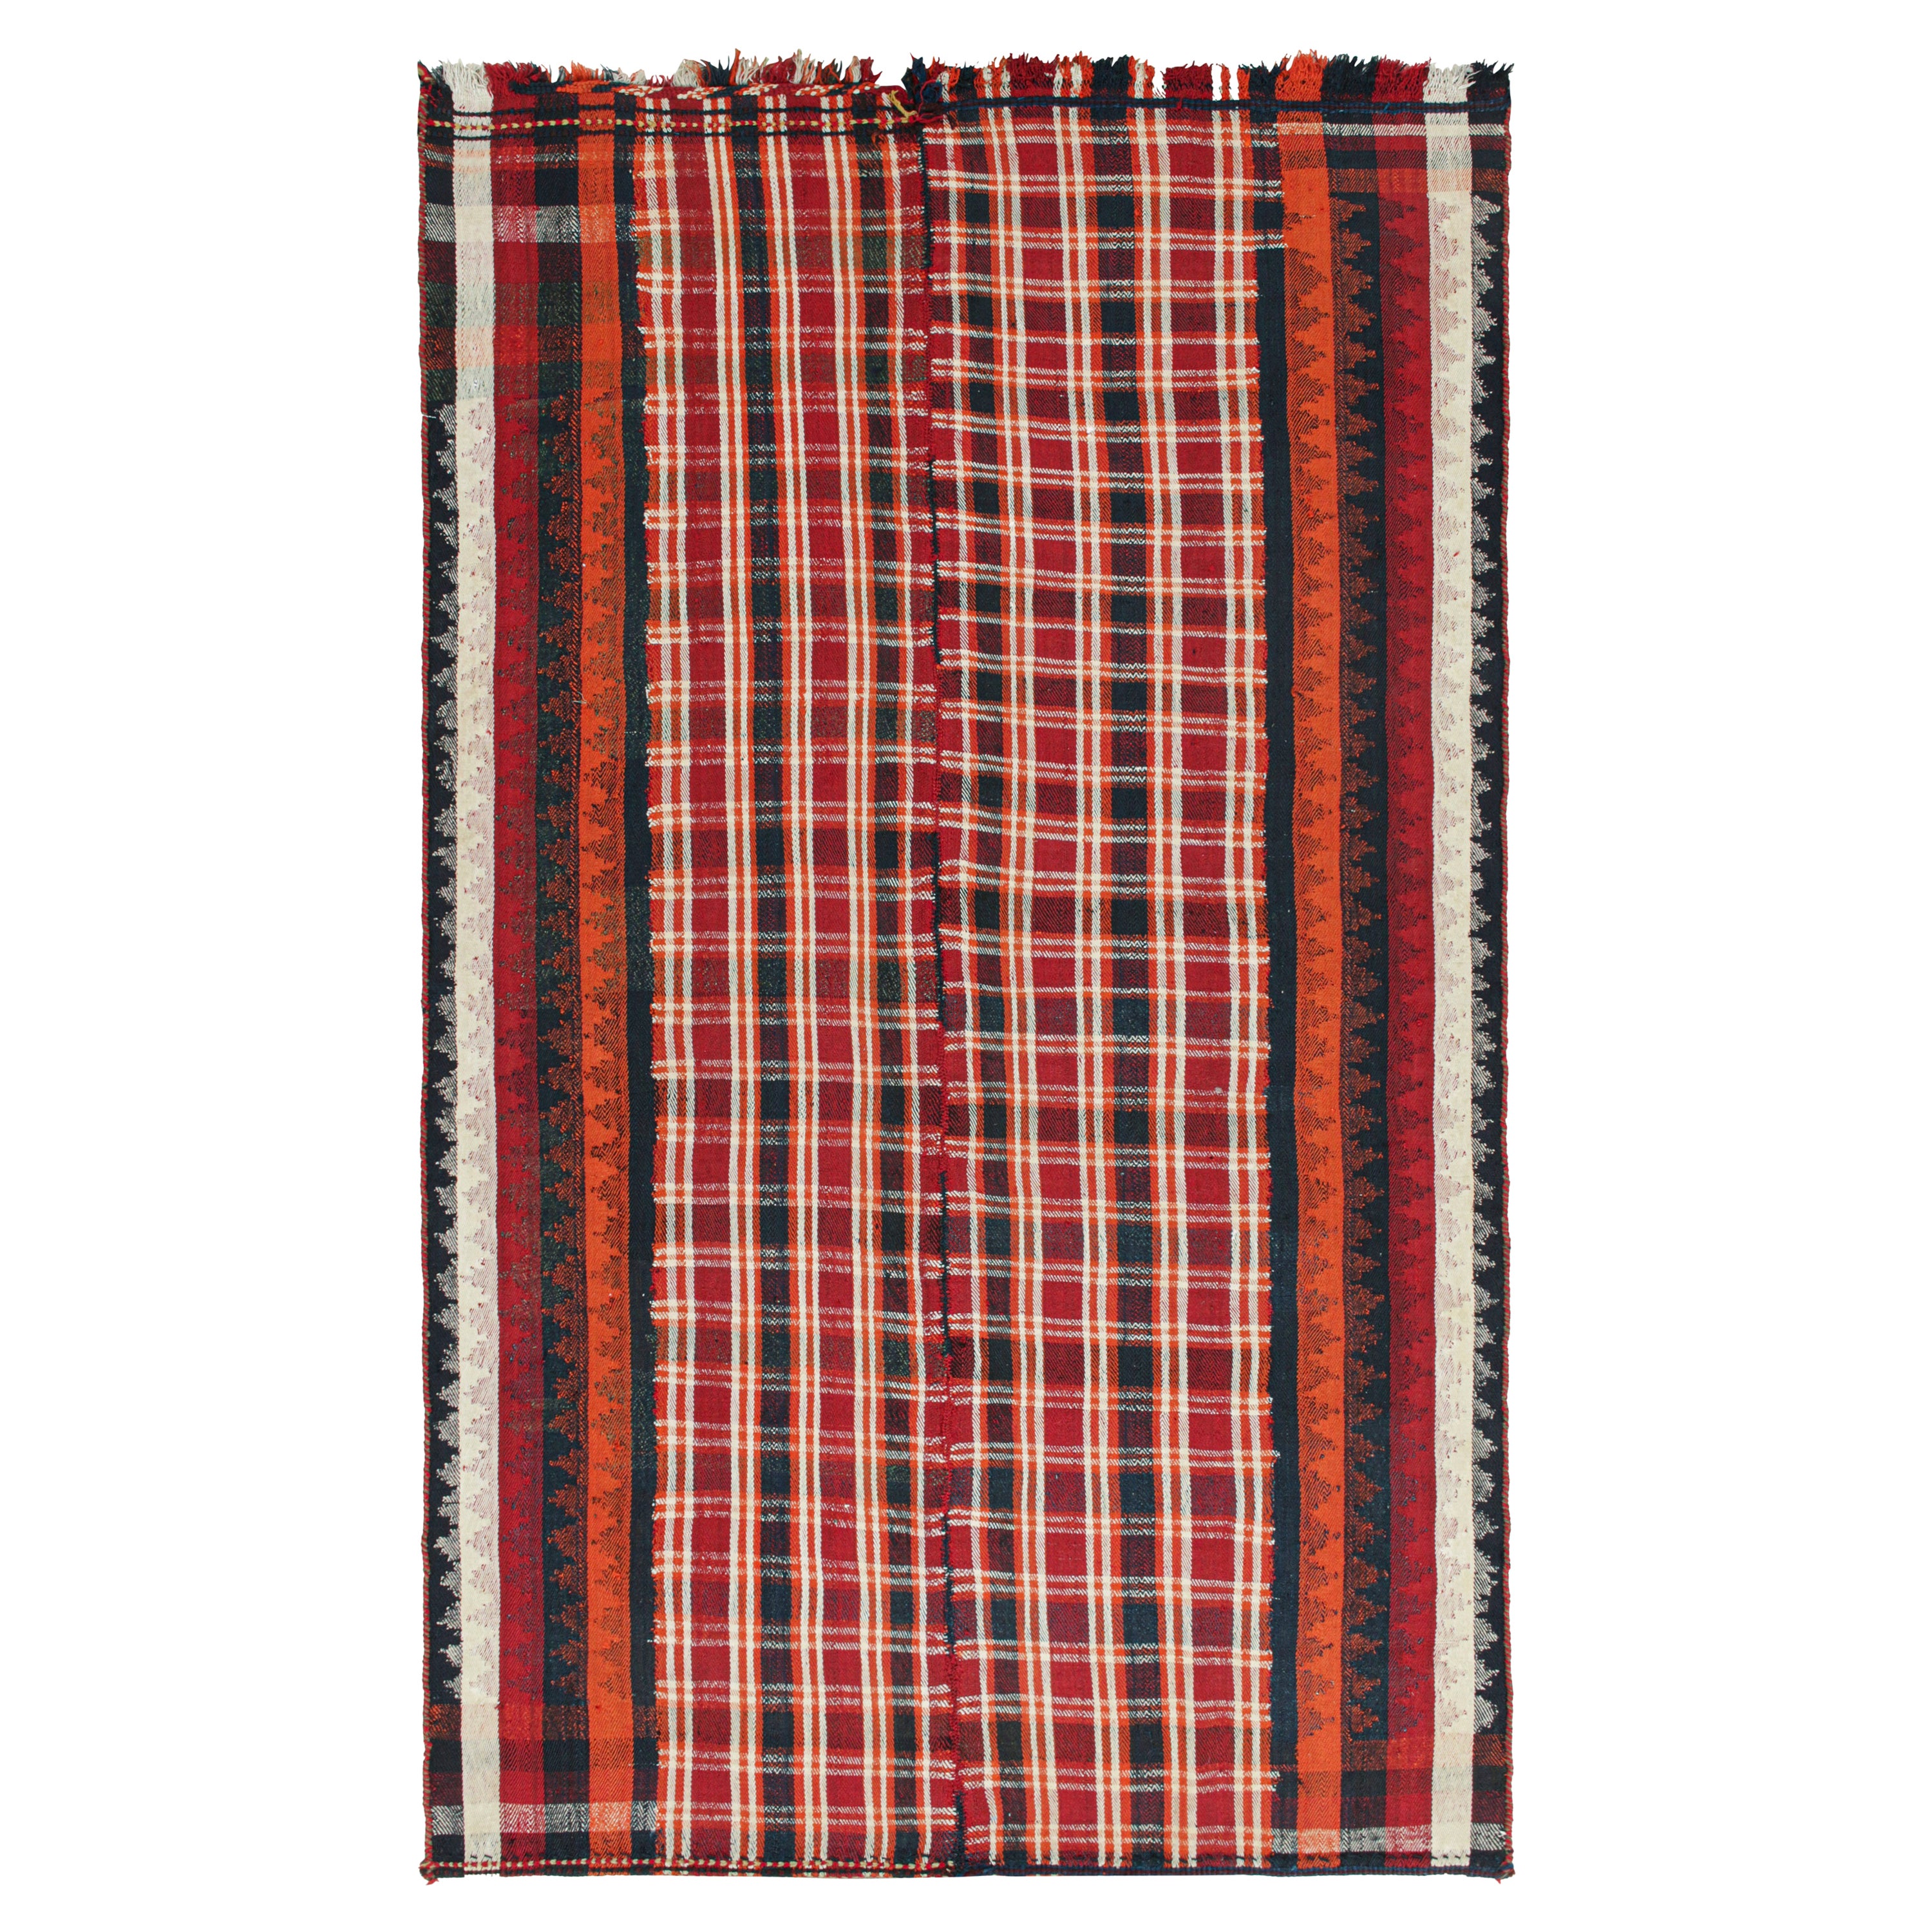 Vintage Persian Kilim in Red with Plaid Multicolor Stripes